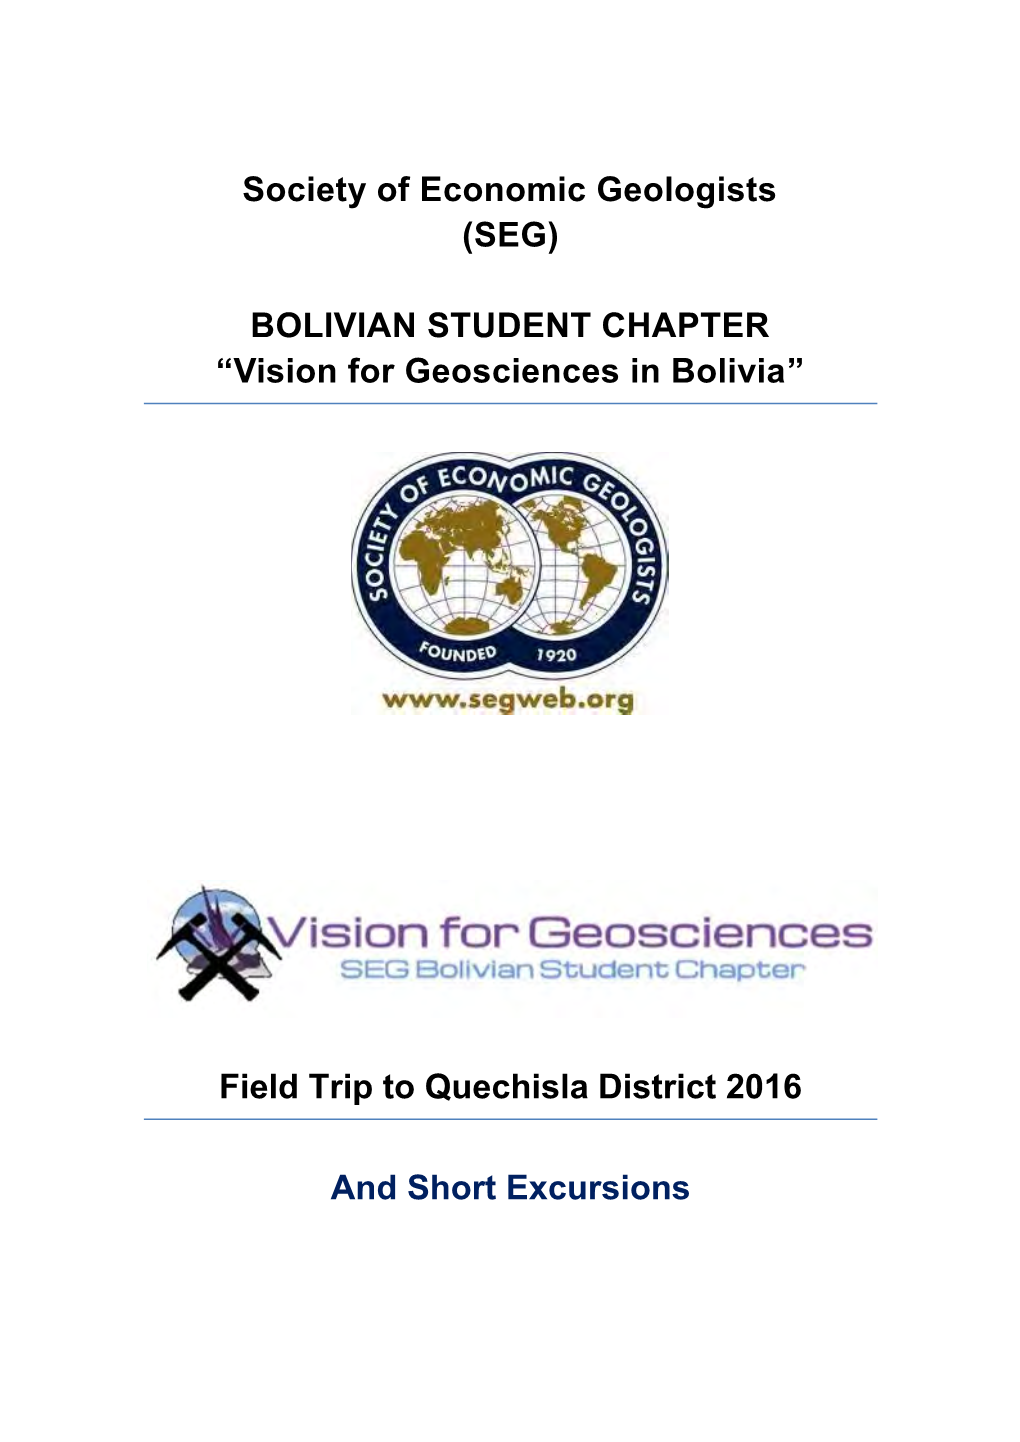 BOLIVIAN STUDENT CHAPTER “Vision for Geosciences in Bolivia”